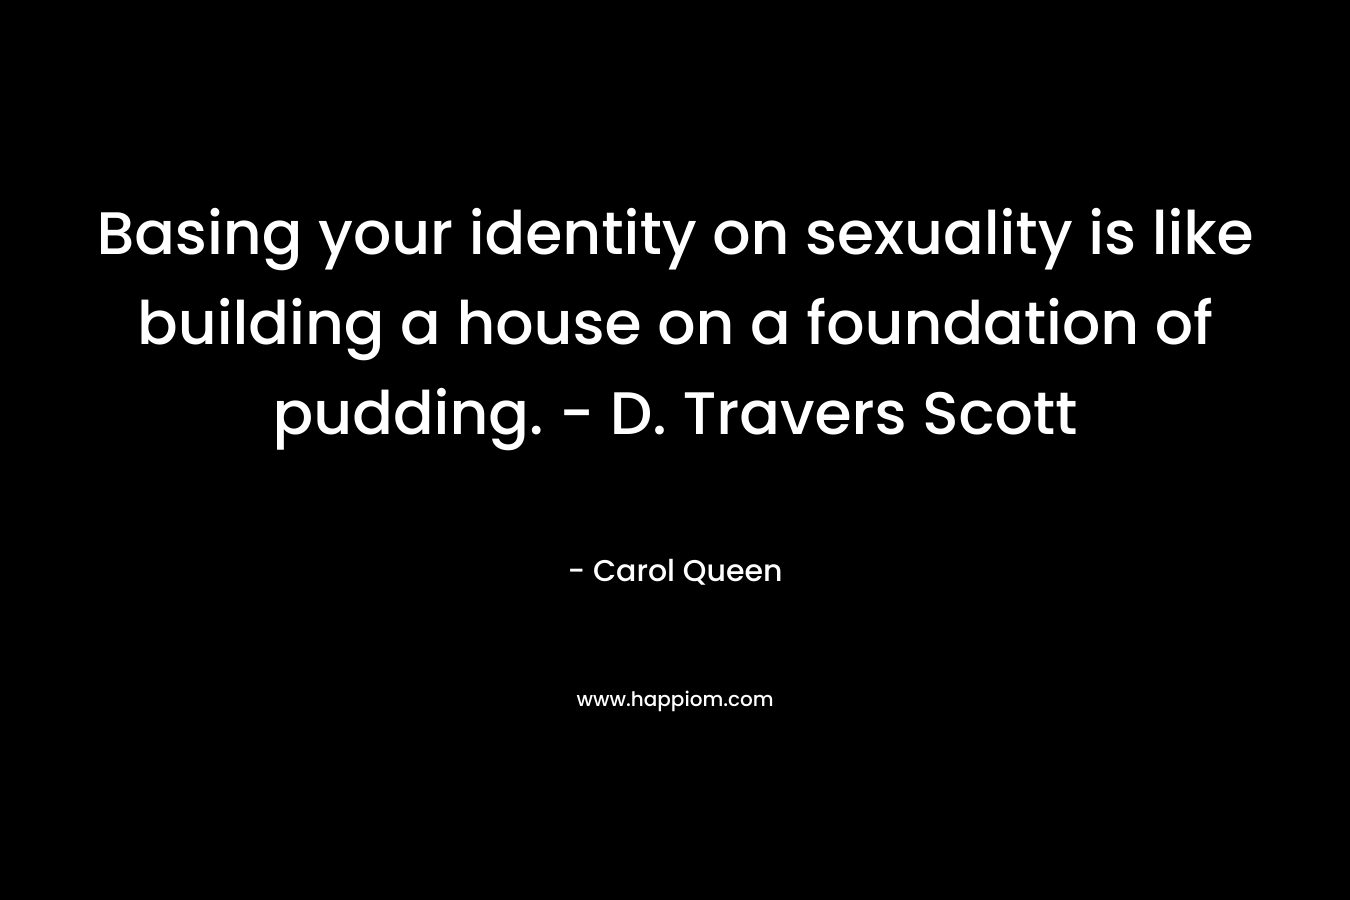 Basing your identity on sexuality is like building a house on a foundation of pudding. - D. Travers Scott